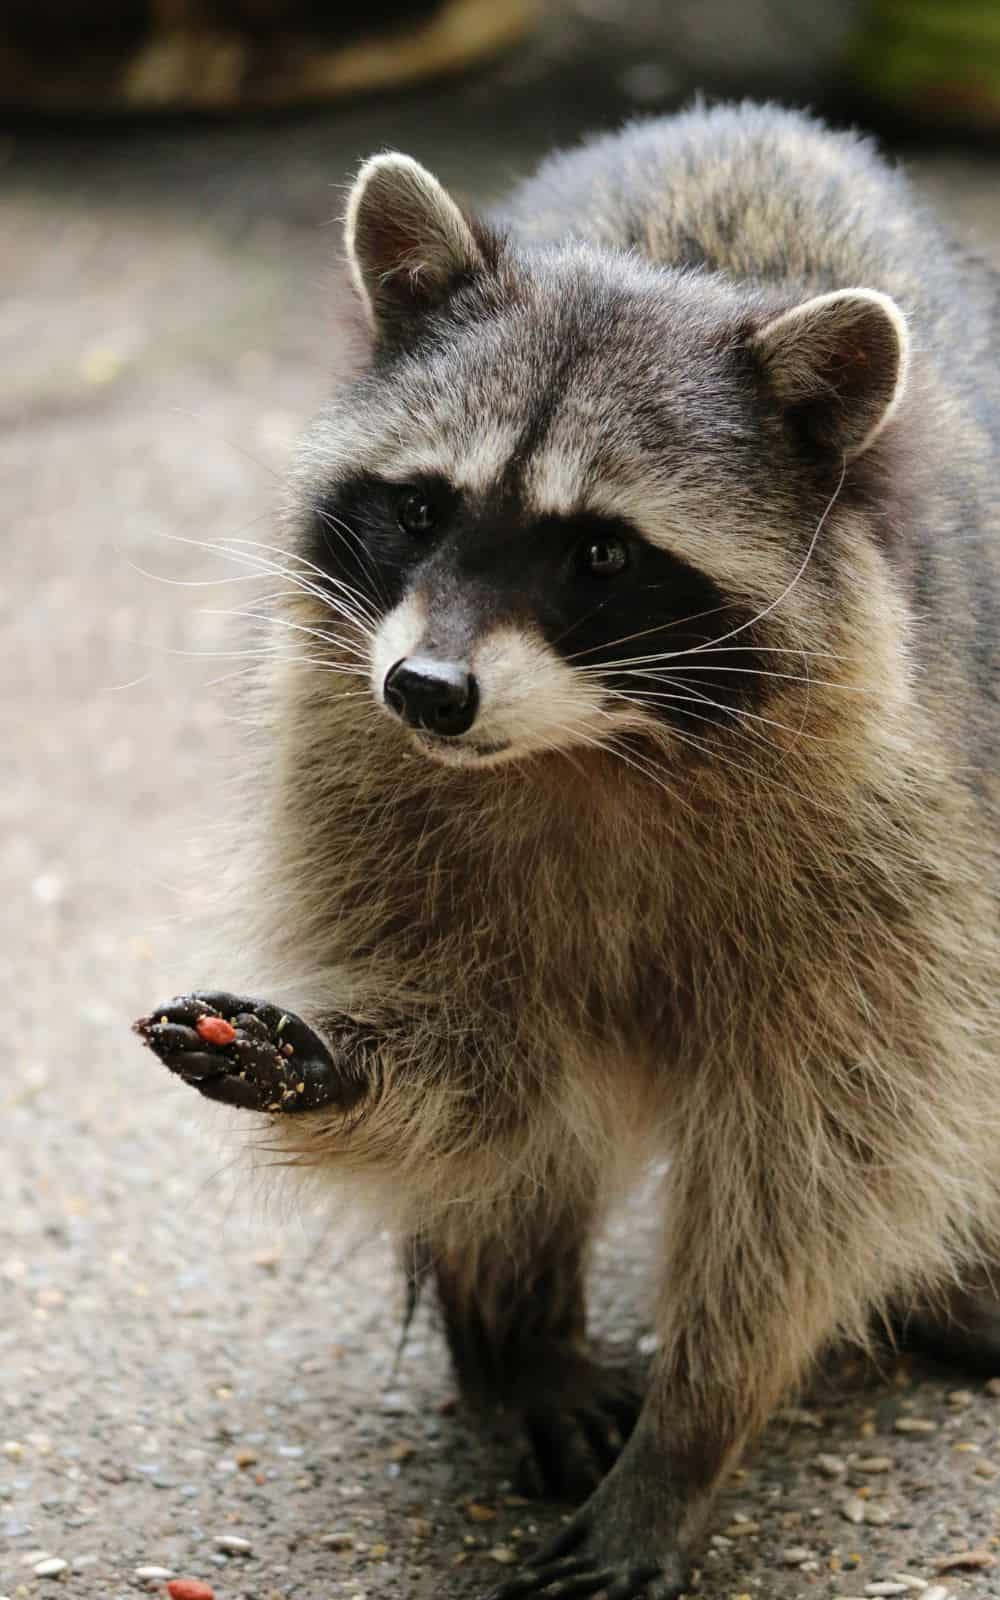 Raccoon Dream Meaning - What associations do we have with raccoons